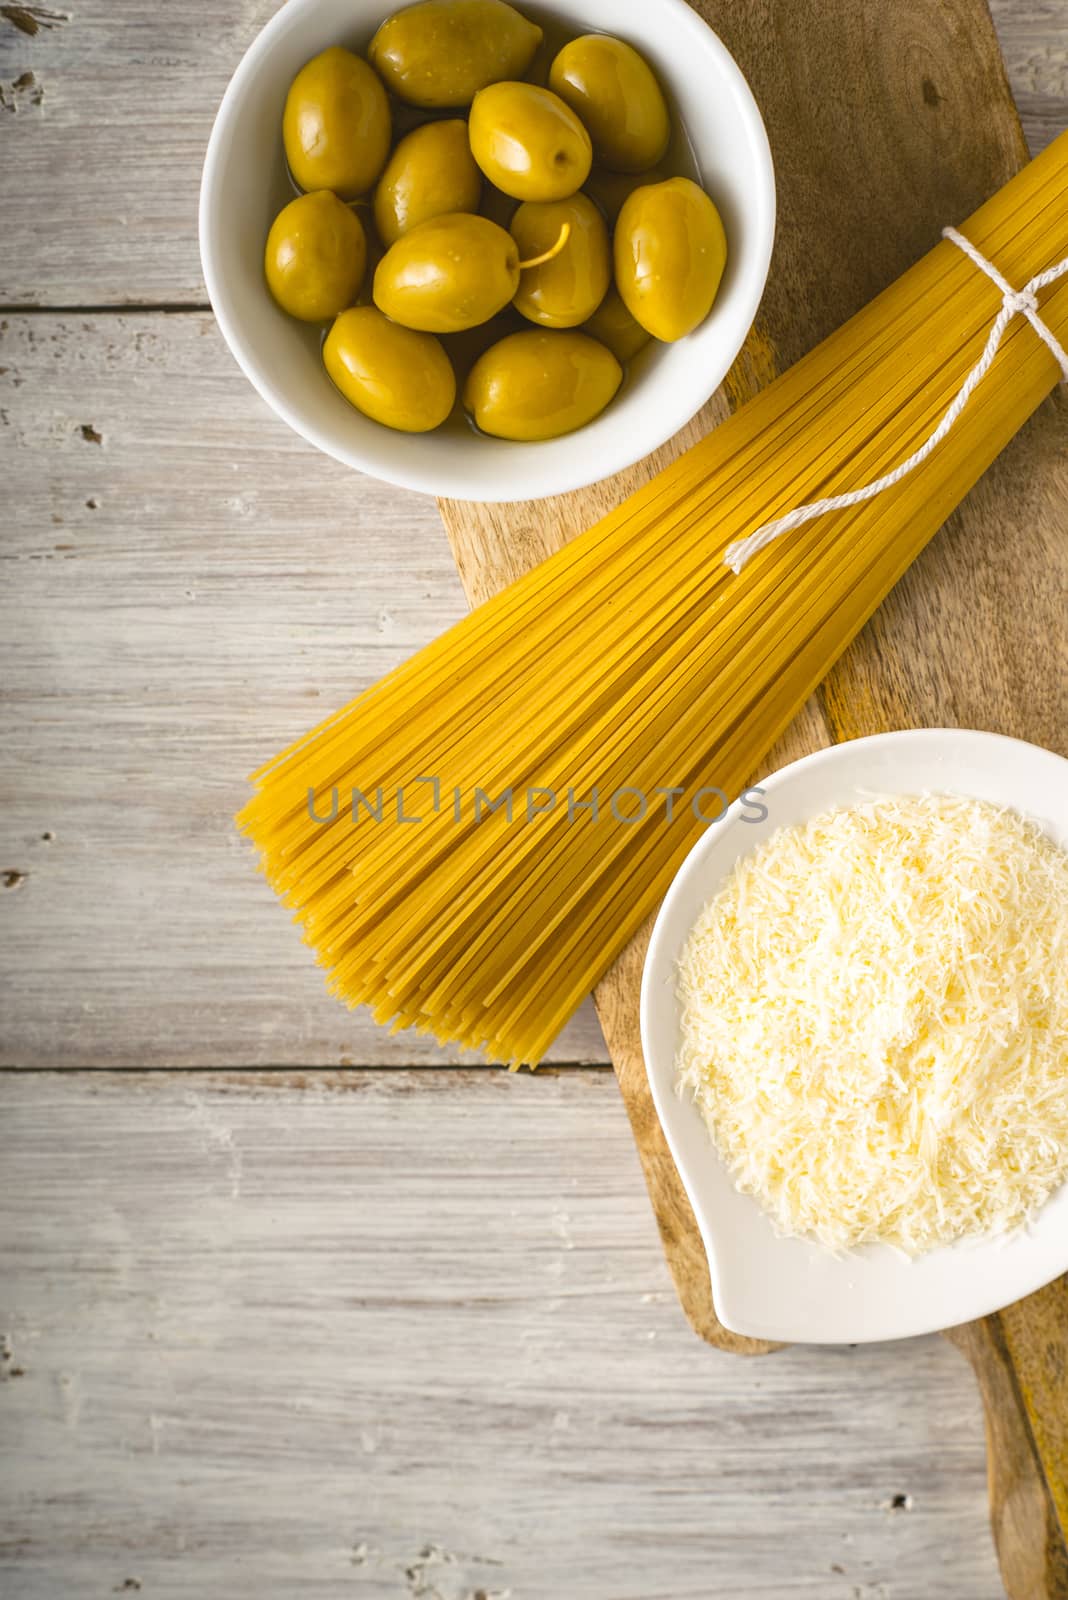 Raw spaghetti with olives and cheese on the white wooden table vertical by Deniskarpenkov